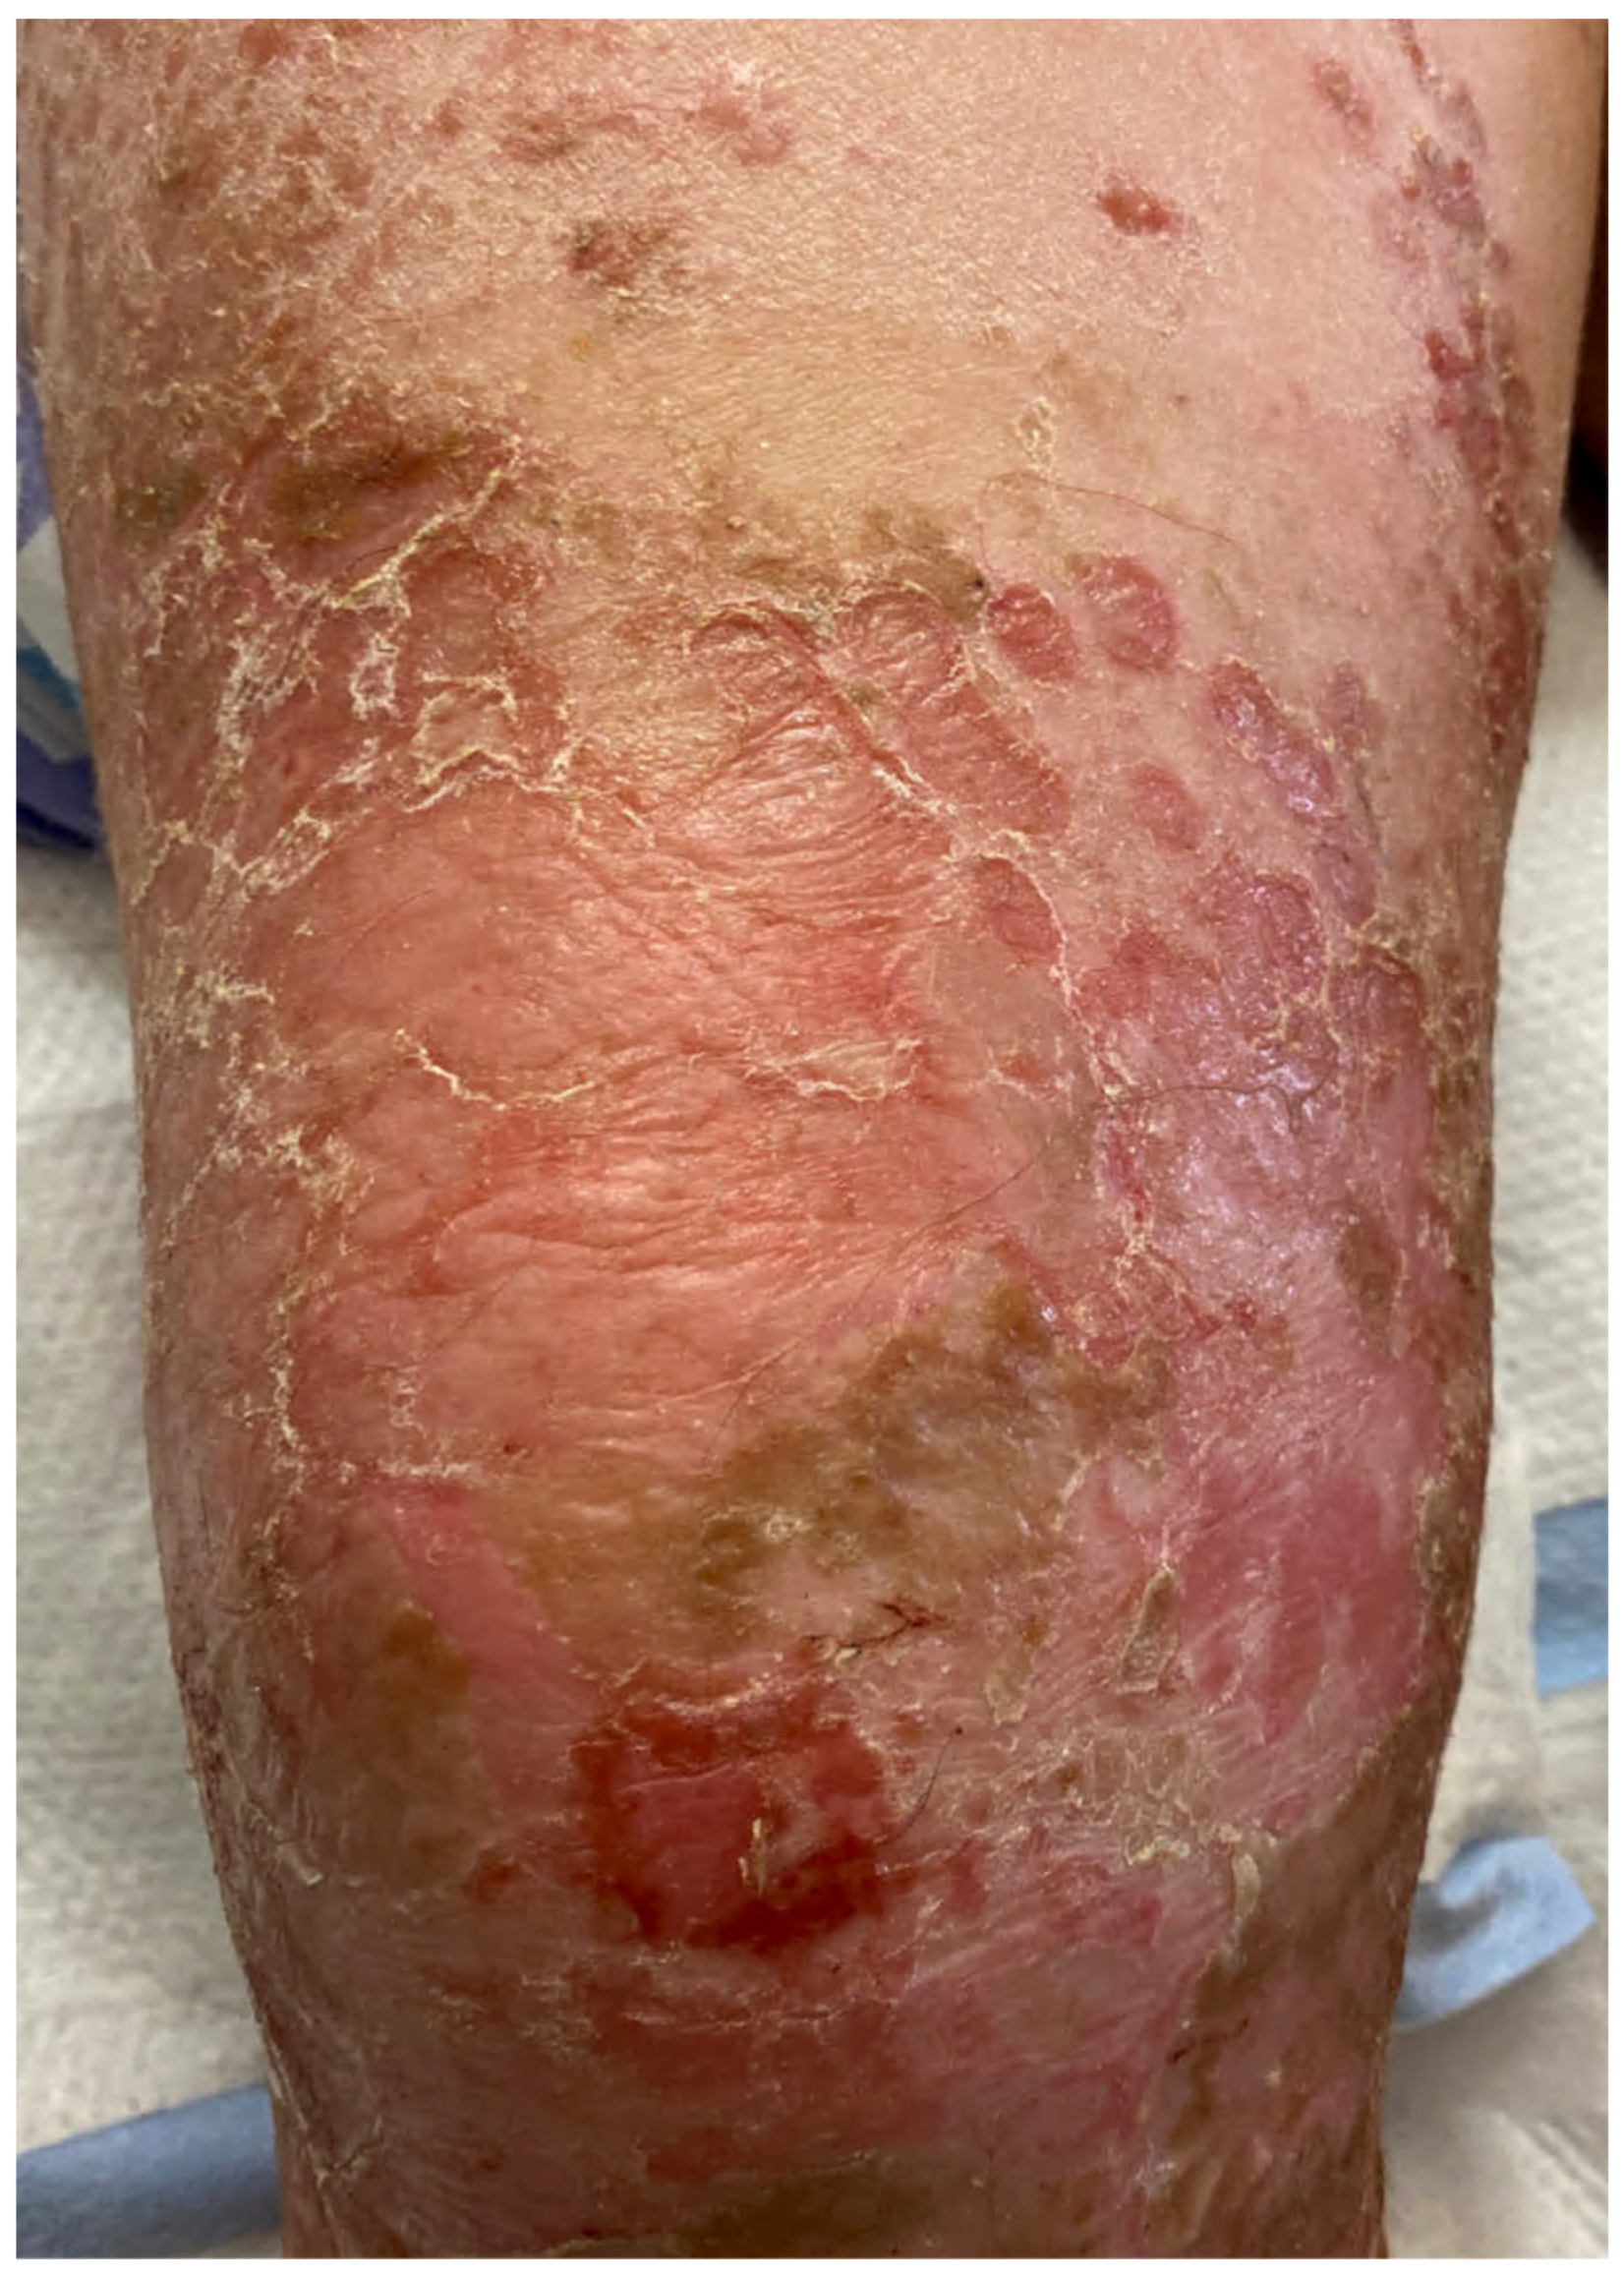 Staphylococcal scaldeWd skin syndrome and toxic shock syndrome.